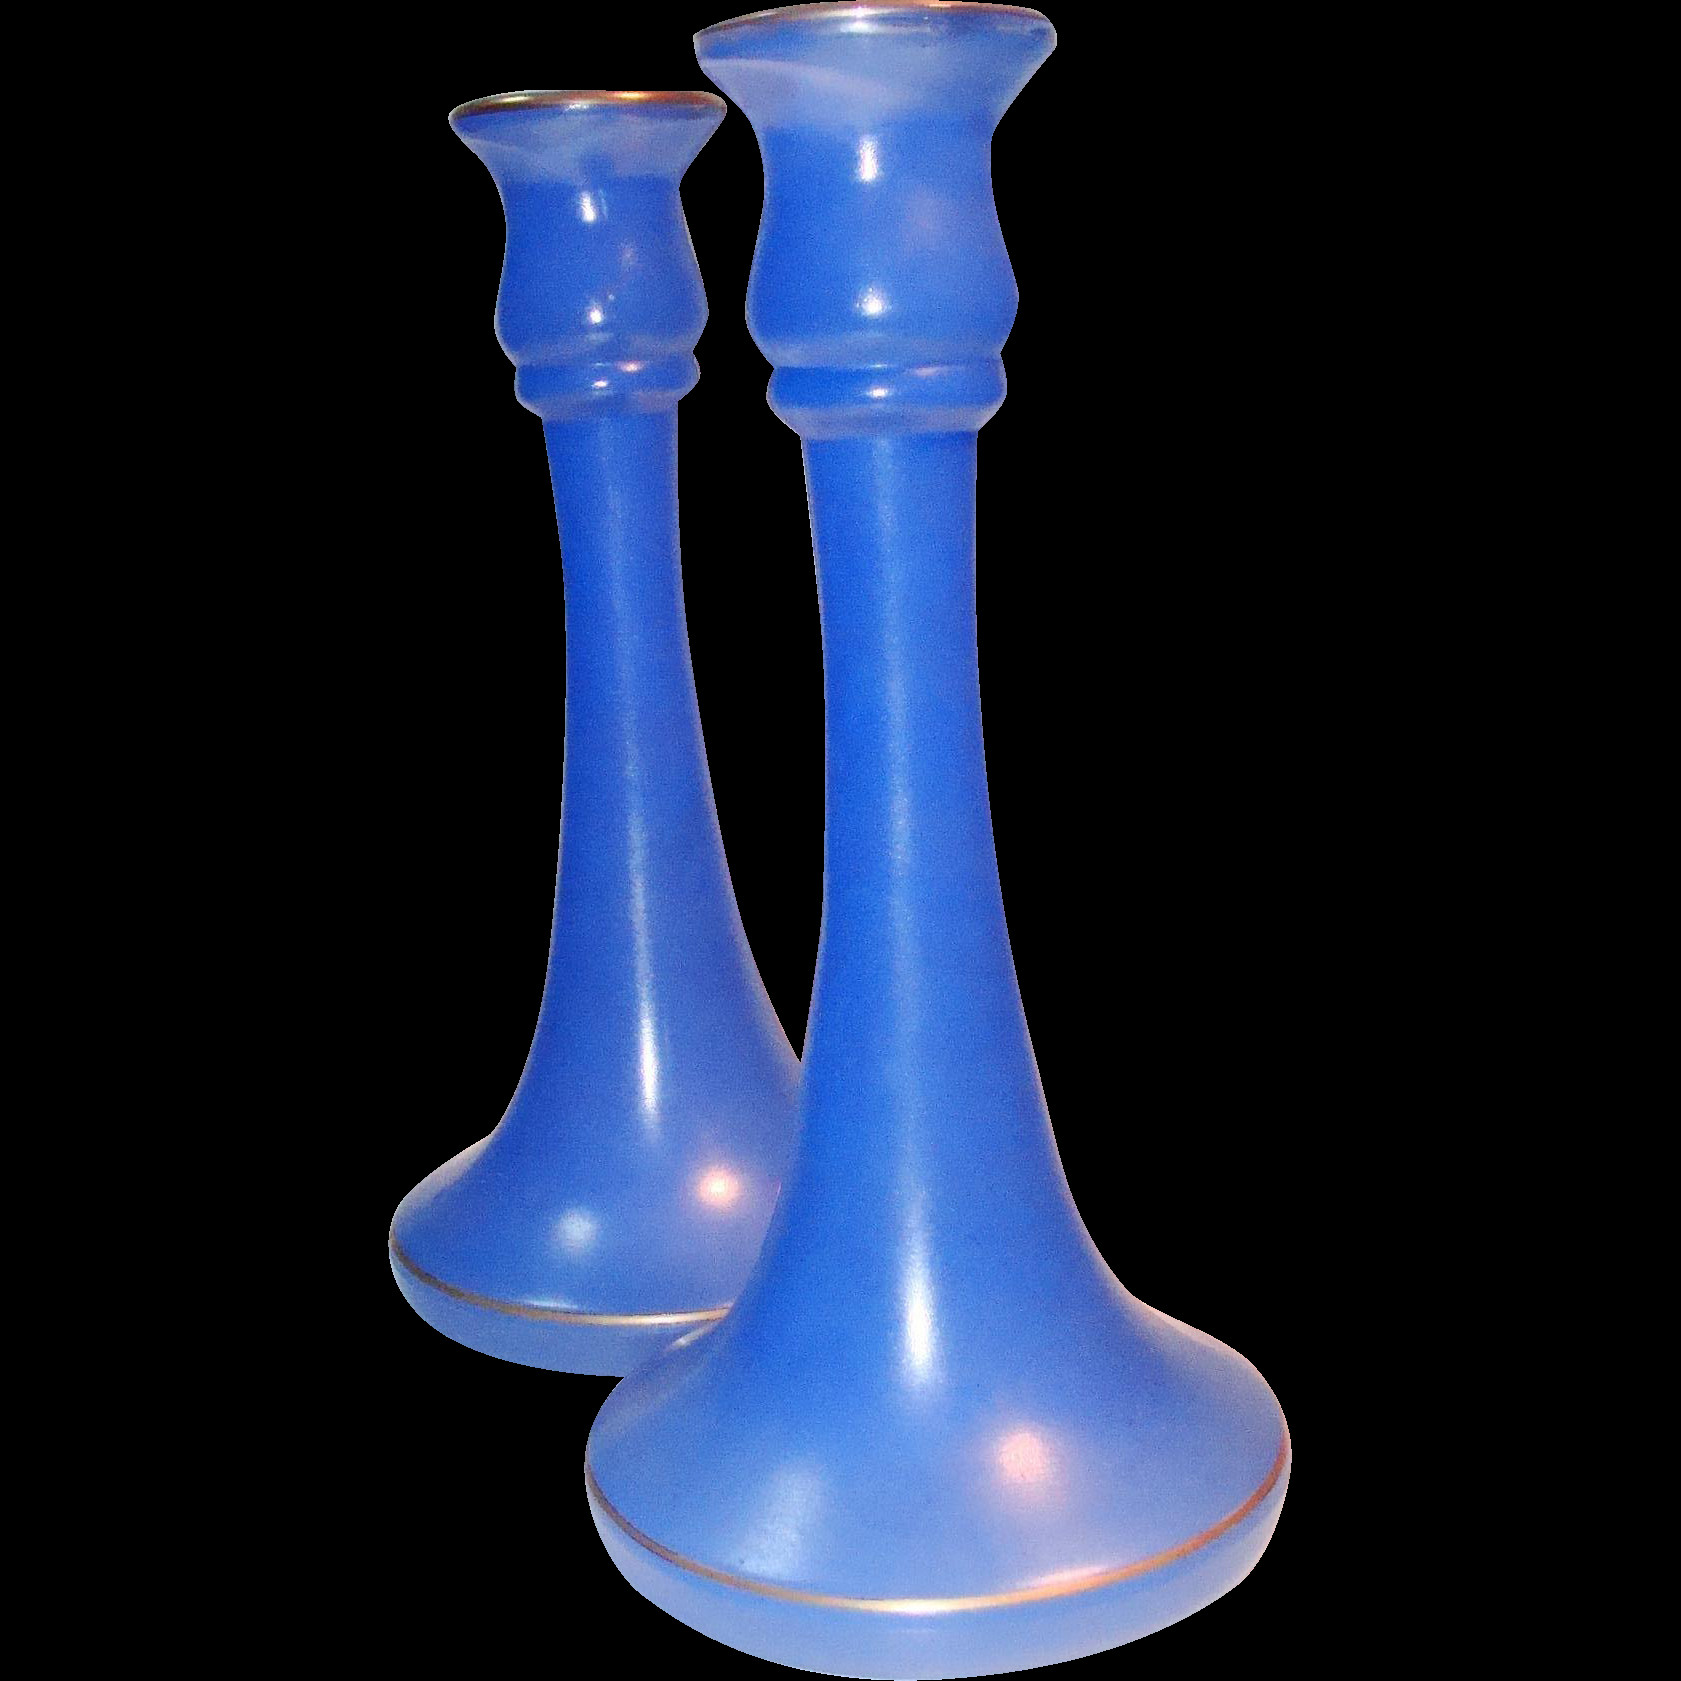 27 Fashionable Blue Vintage Vases 2024 free download blue vintage vases of cool blue frosted glass candlesticks pair 9 tall intended for cool blue glass candlesticks a pair to use on your table to make you at least feel cool in summer